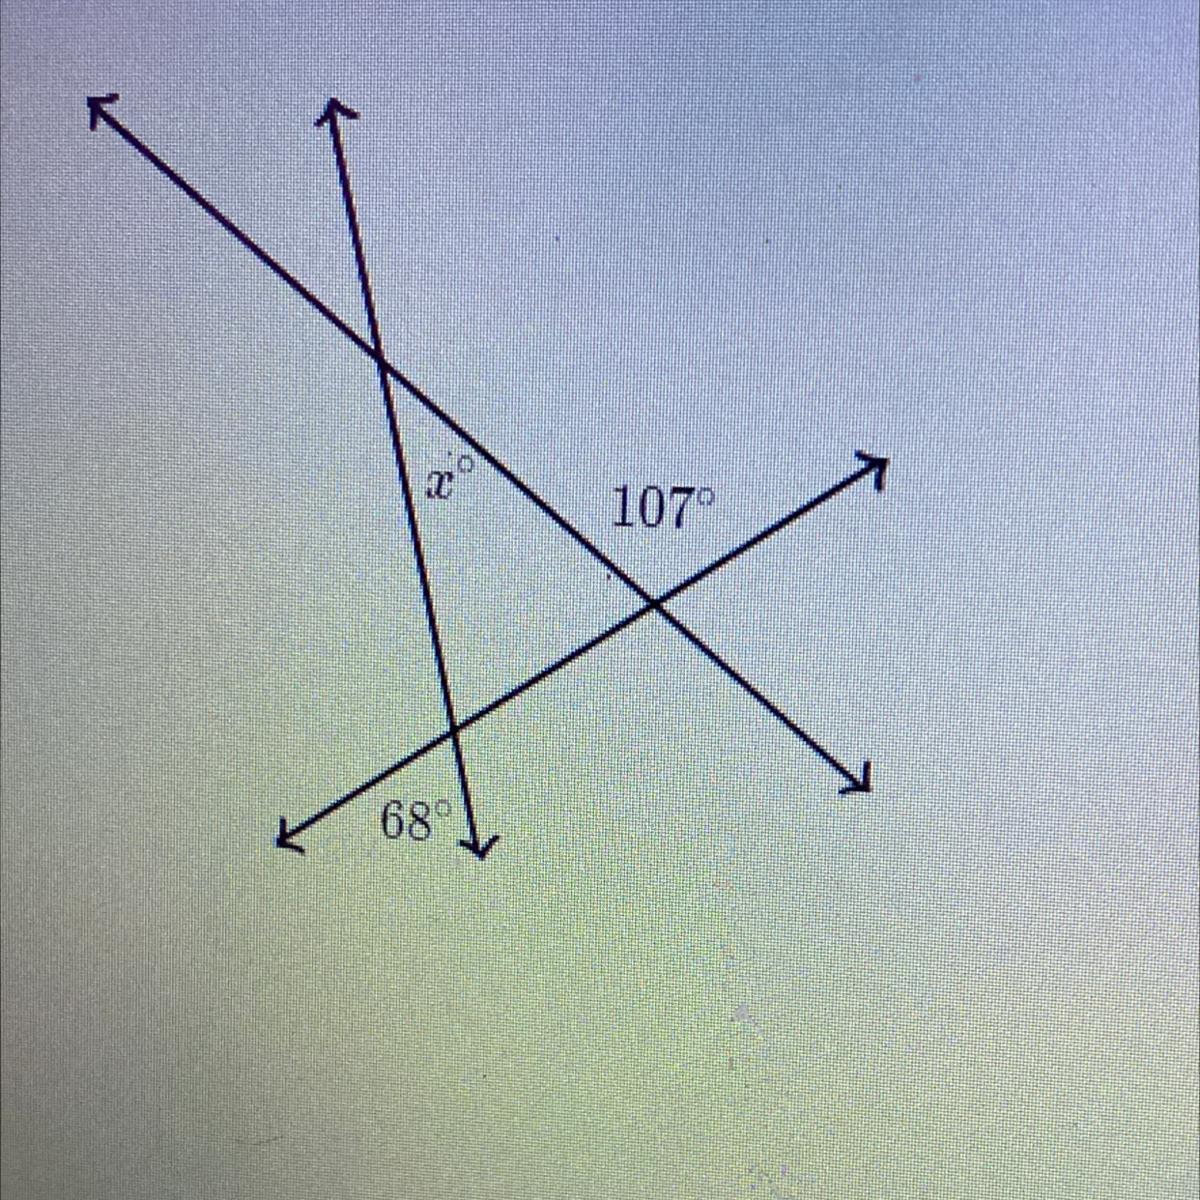 In The Diagram Shown On The Left , Three Lines Intersect To Form A Triangle . What Is The Value Of X